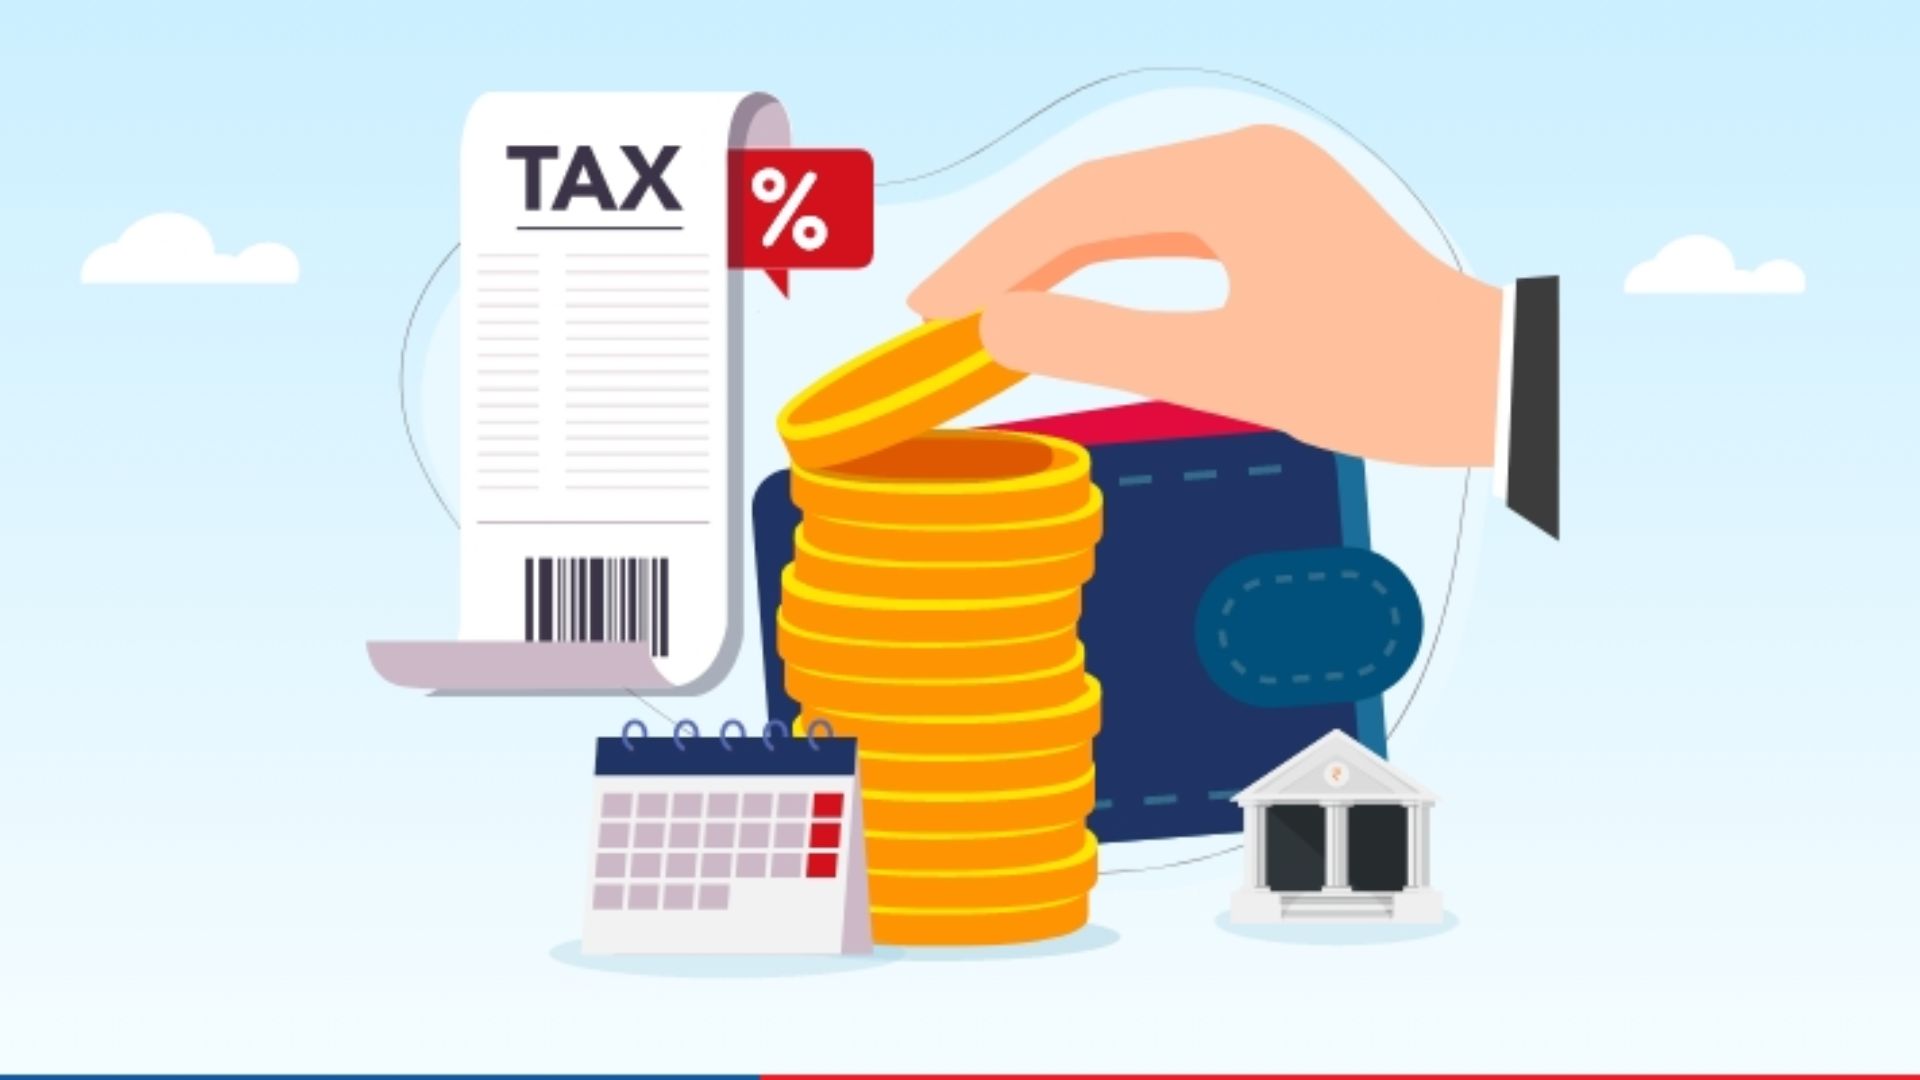 Guide For Tax Planning Strategies to Save Money